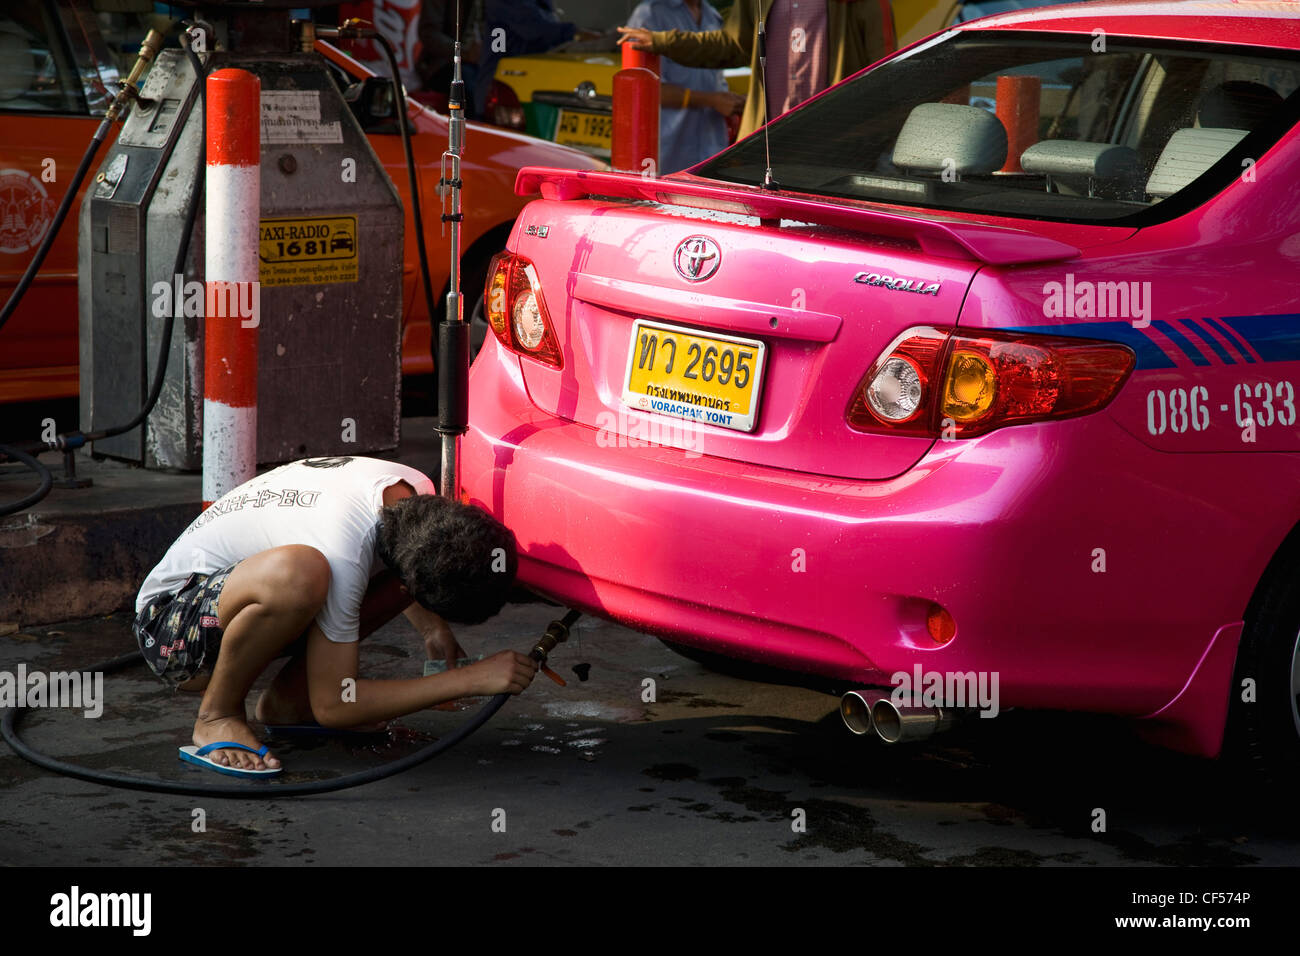 Thailand, Bangkok, Pink metered taxi cab being refuelled with LPG gas pipe at filling station by male driver. Stock Photo